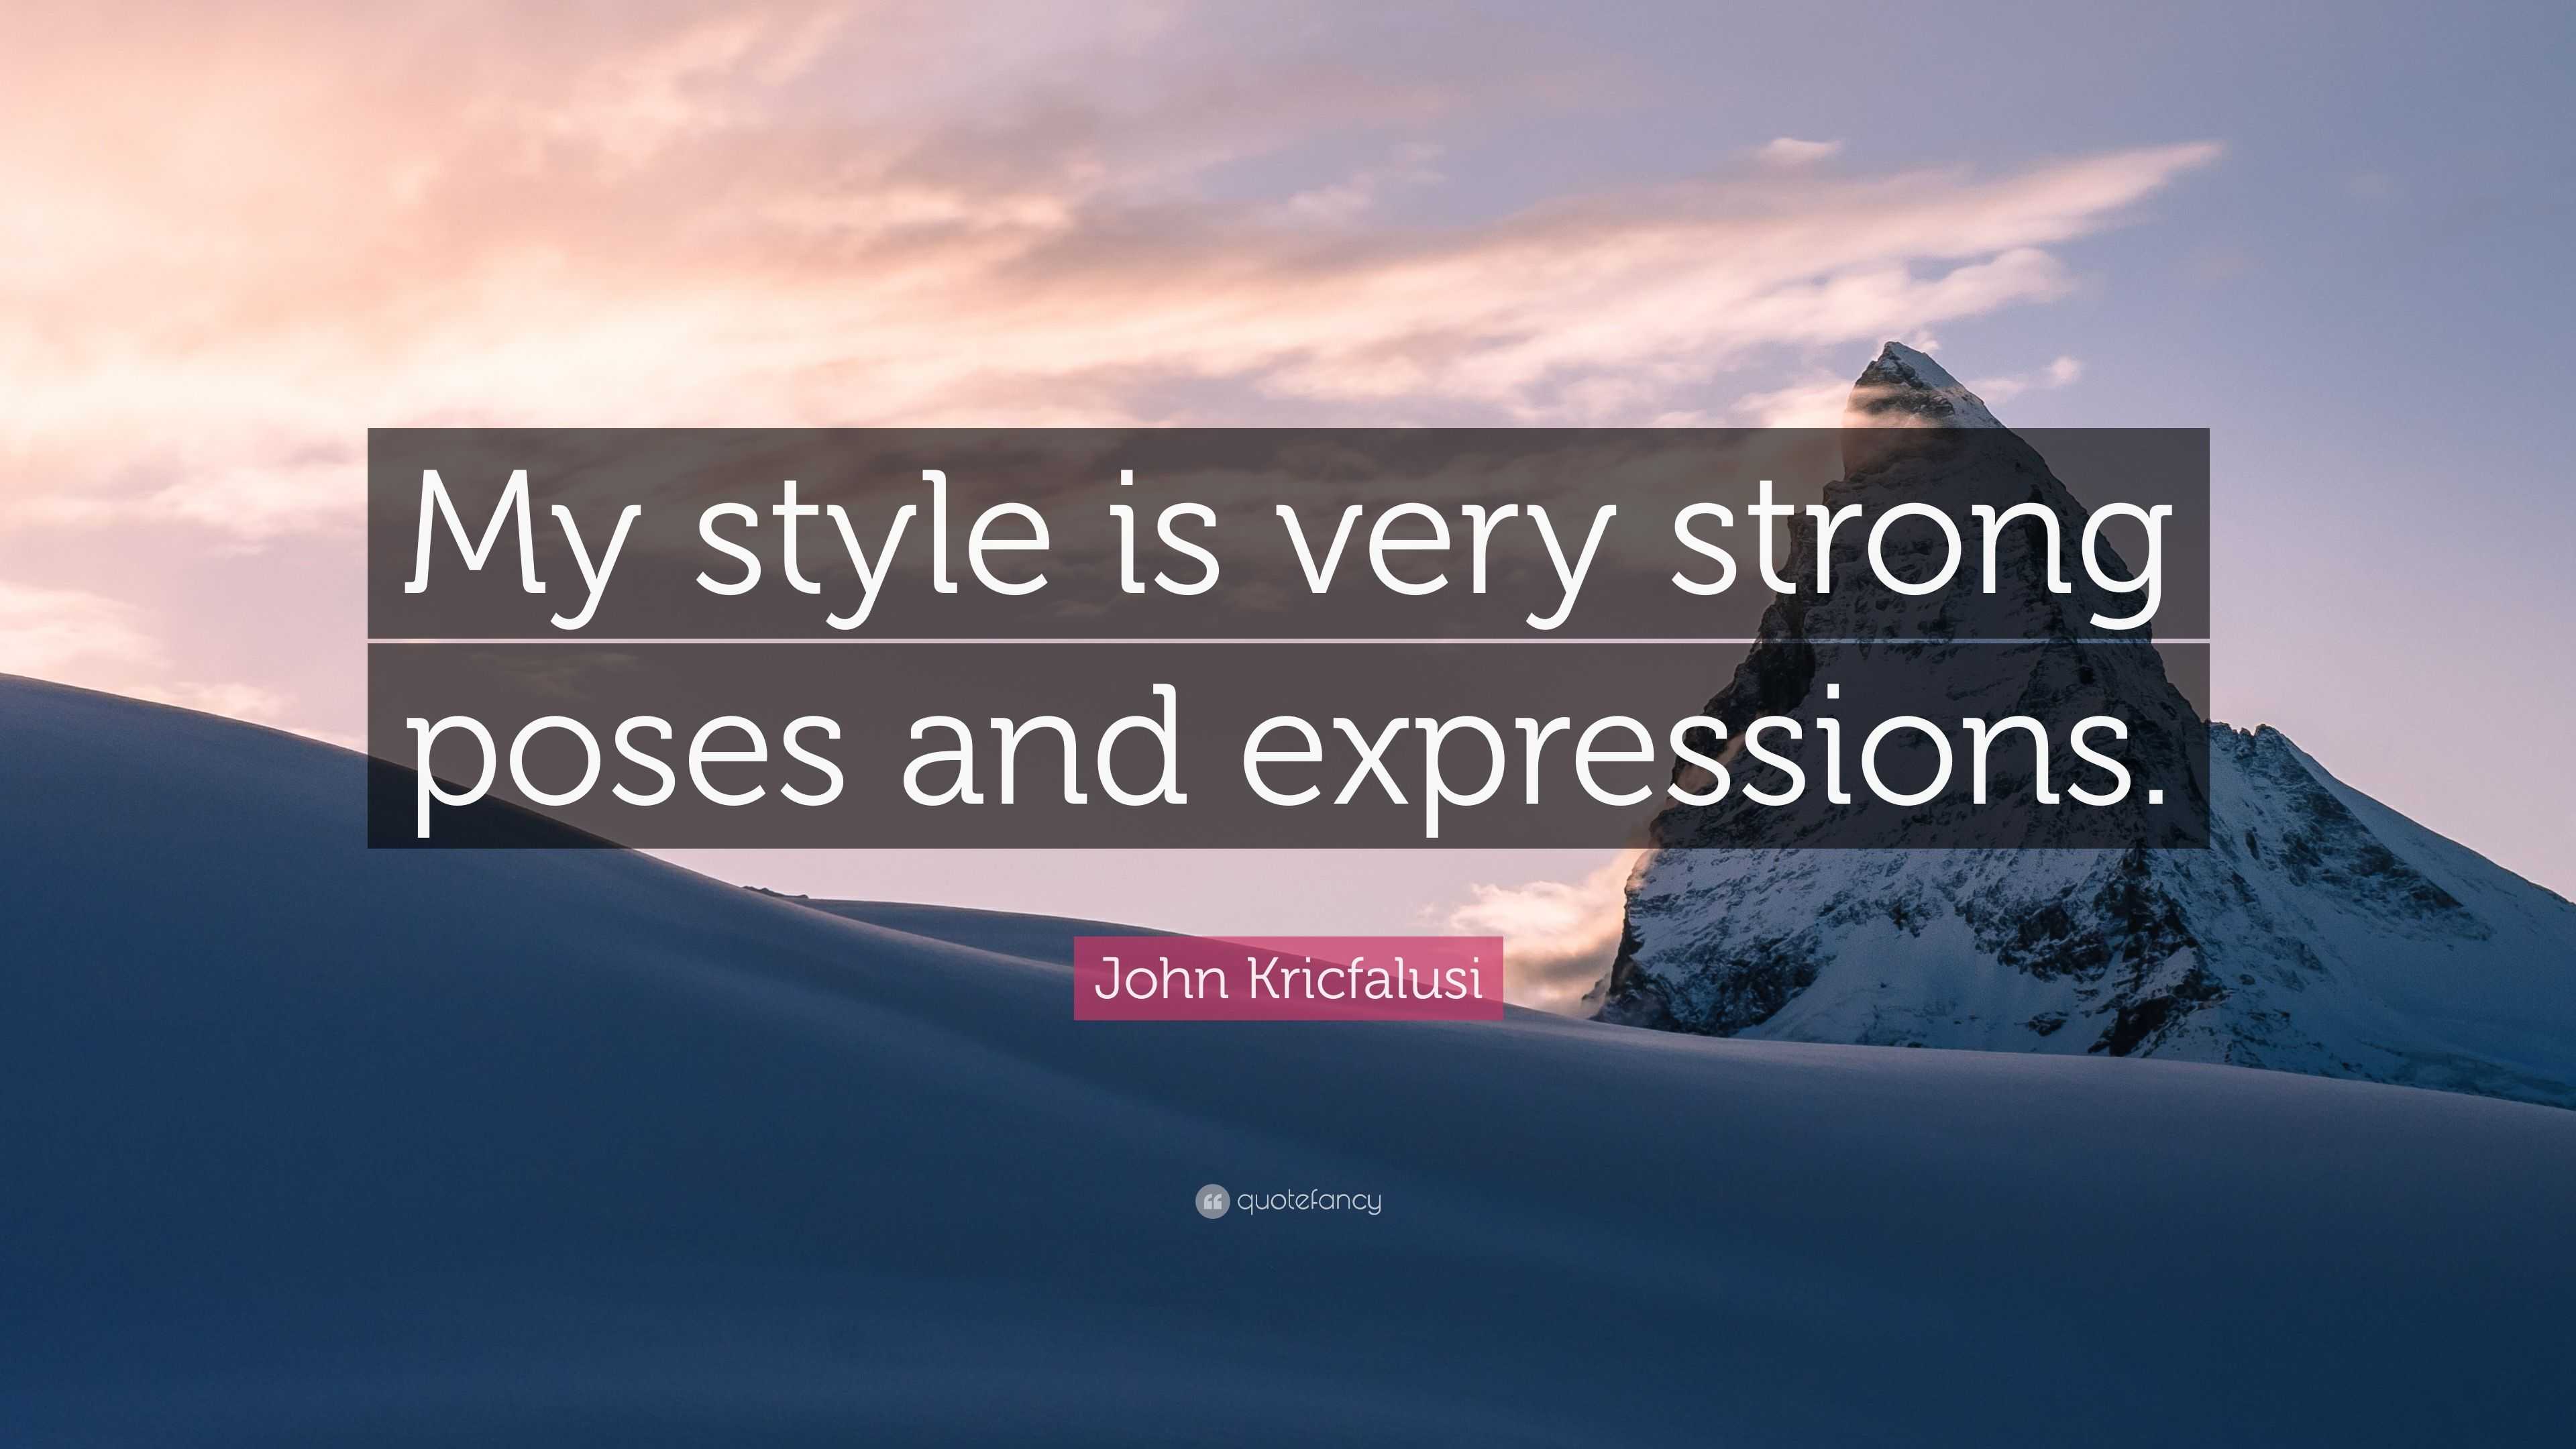 4055271 John Kricfalusi Quote My style is very strong poses and